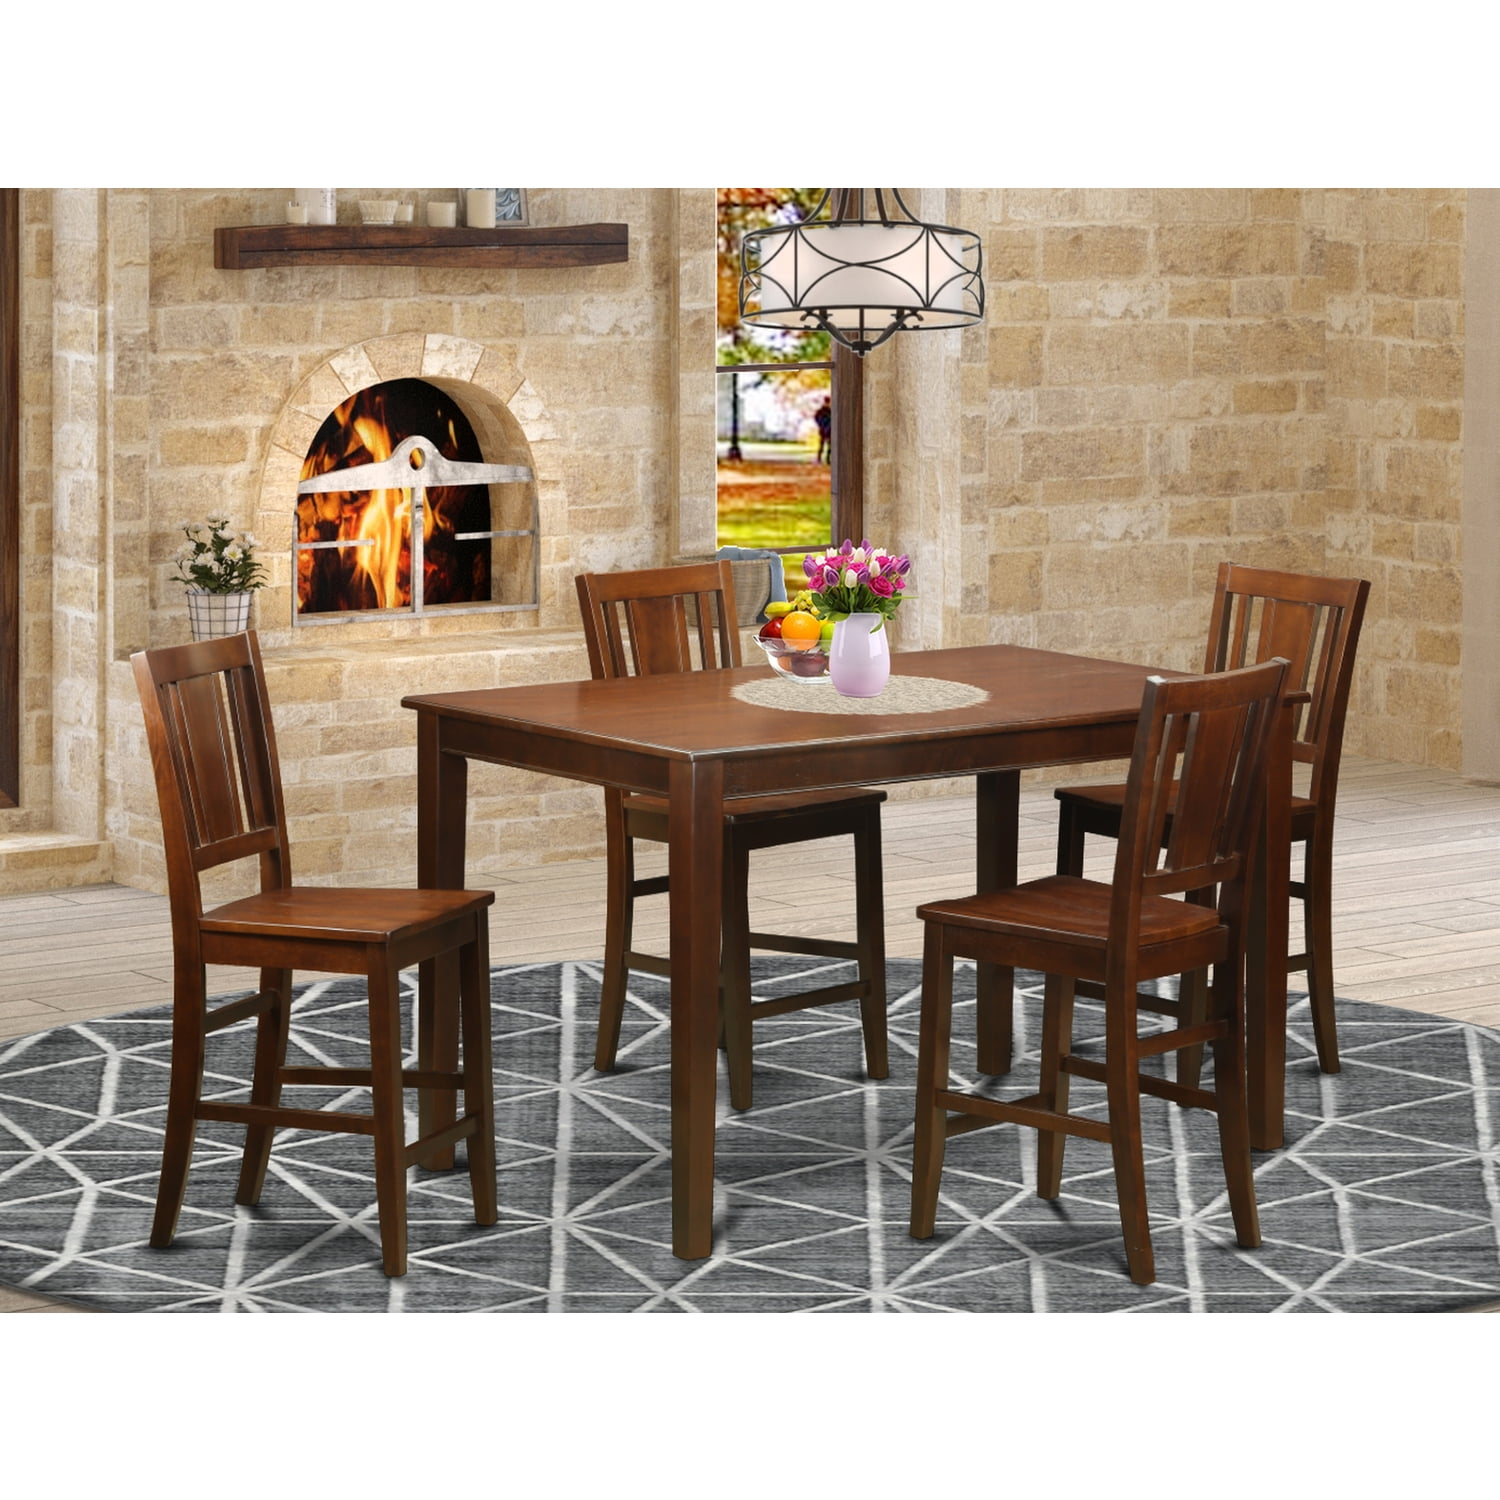 Pub Table Set Gathering And, Round Pub Table Seats 6